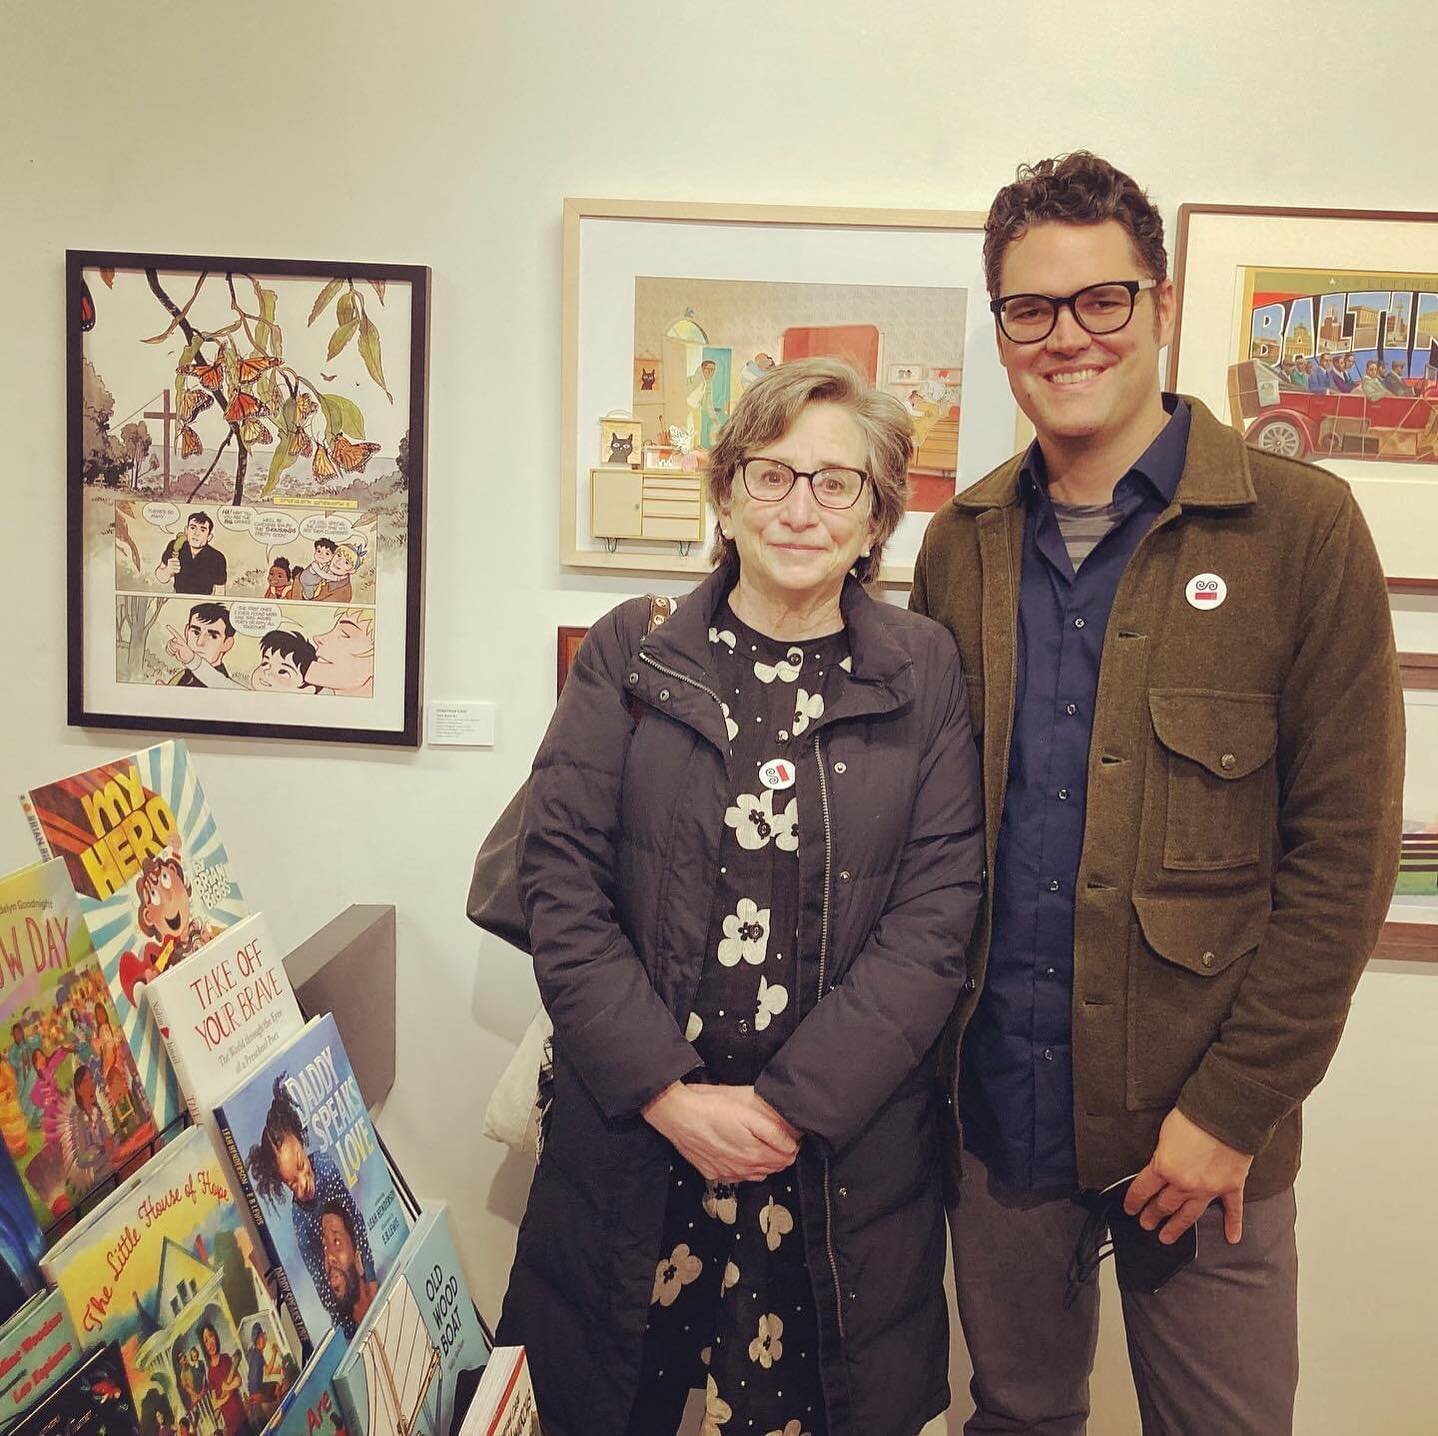 Me and my lovely editor, Margaret Ferguson. The Society of Illustrators&rsquo; Annual Art show included a page from Little Monarchs, so we finally met there for the first time yesterday. It was an honor to be featured amongst so many gorgeous pieces,